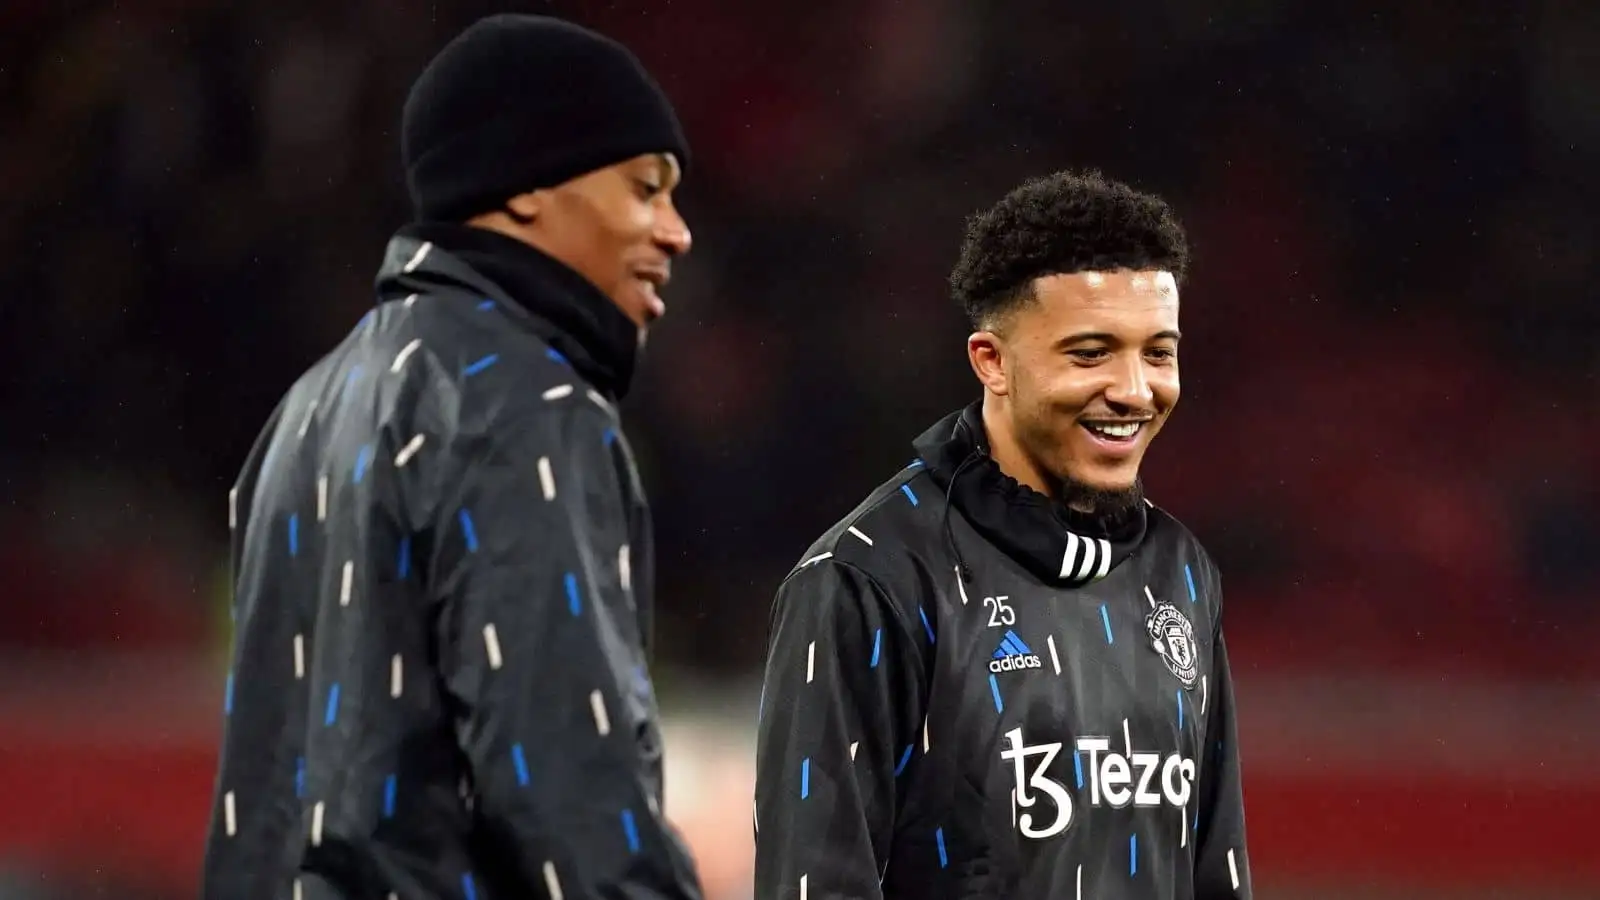 Manchester United's Jadon Sancho and Anthony Martial ahead of the Carabao Cup semi-final, second leg match at Old Trafford, Manchester.